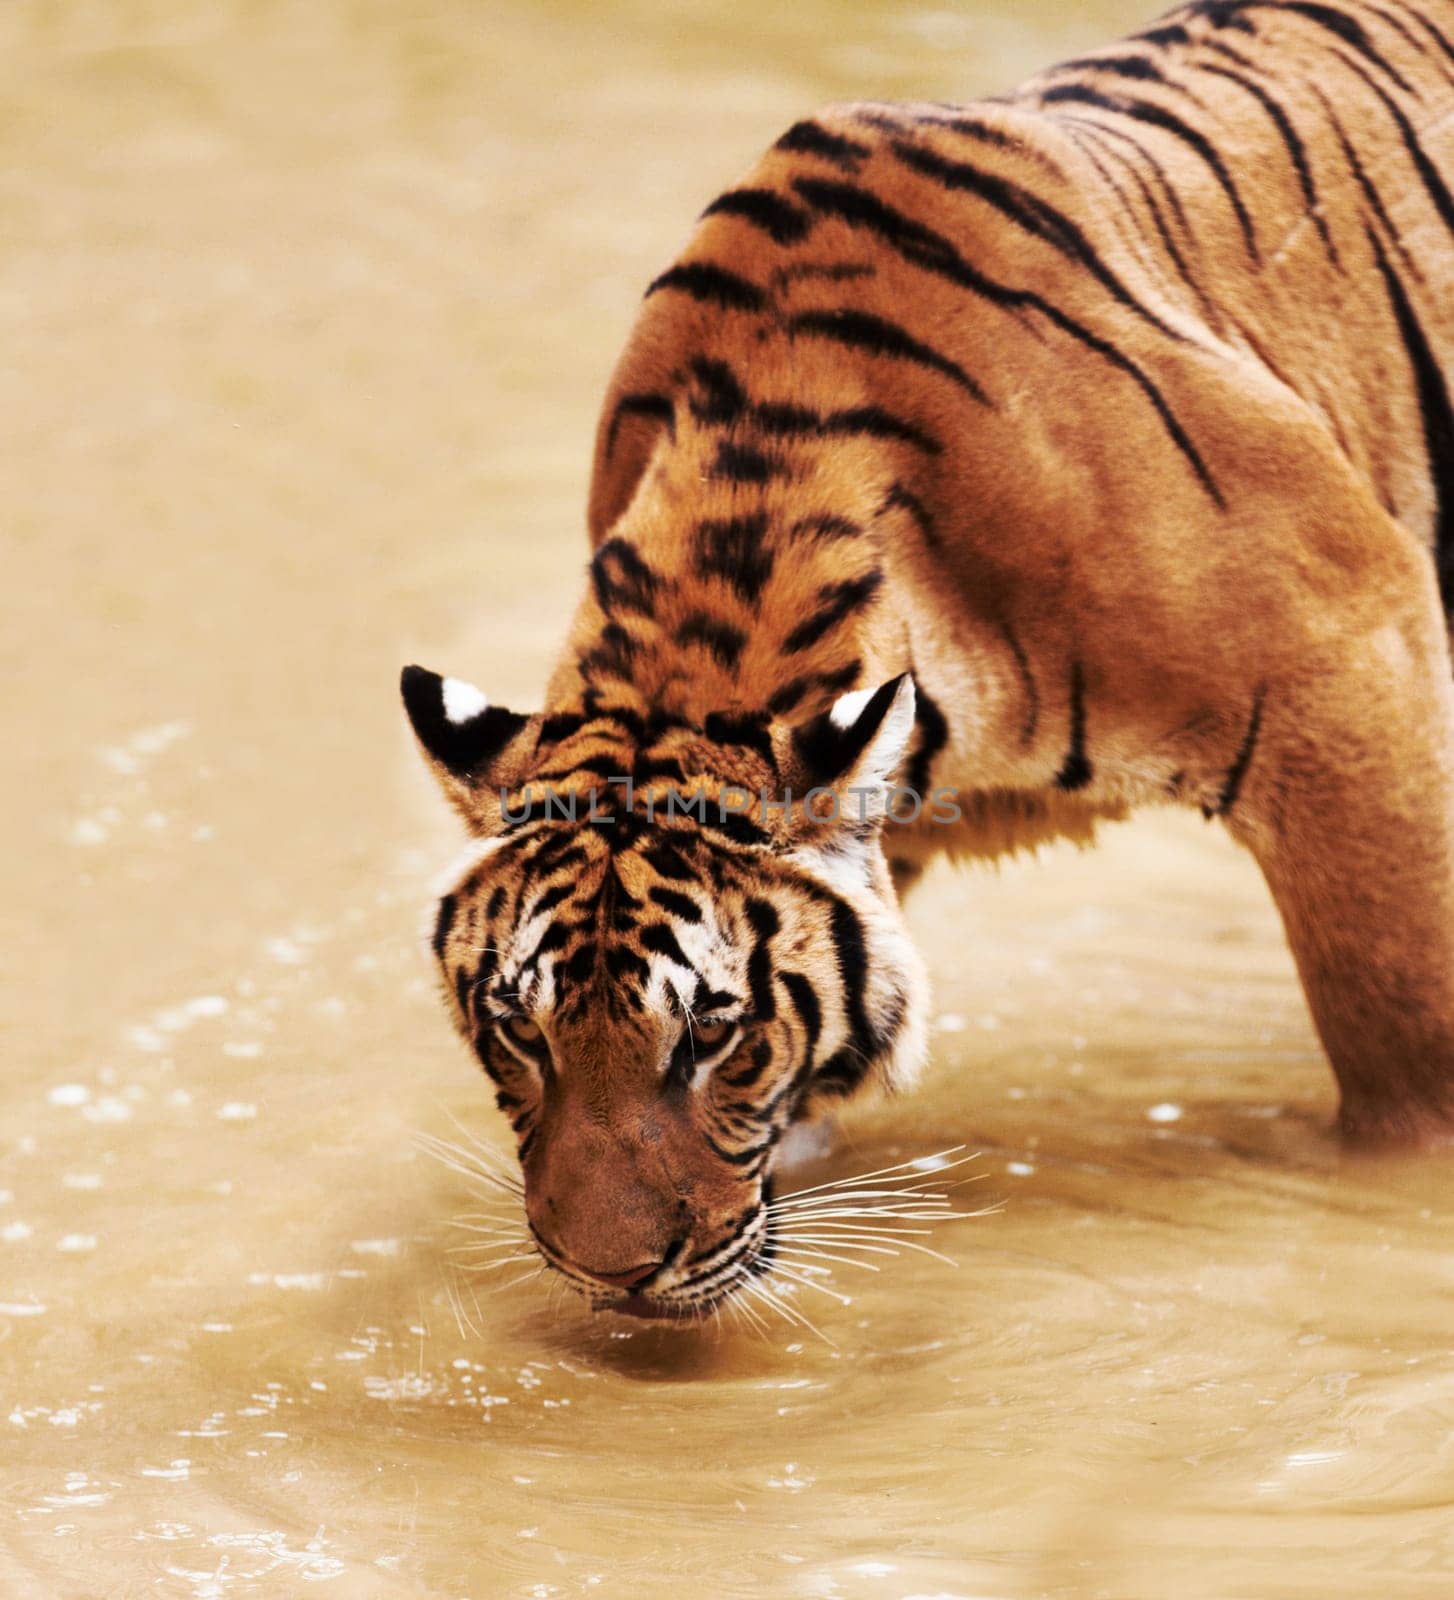 Nature, animals and tiger drinking water in zoo with playful cubs in mud for endangered wildlife. Jungle, strong cat park, river or dam in Thailand for safari, outdoor danger and predator with power.